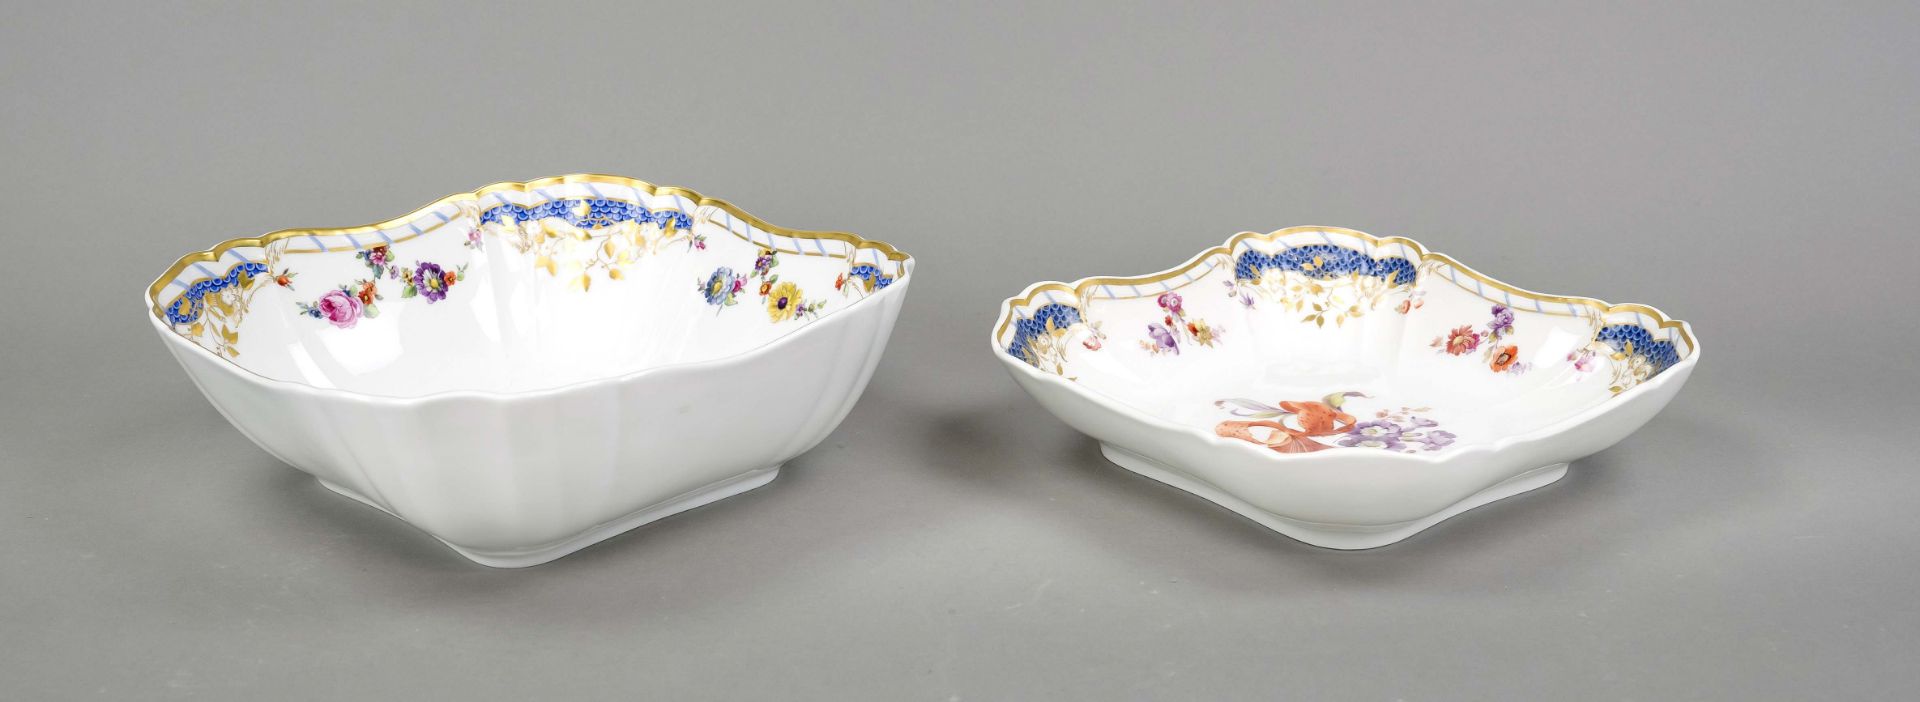 Two Caré bowls, KPM Berlin, 1st choice, red imperial orb mark, rocaille shape, designed by Friedrich - Image 2 of 2